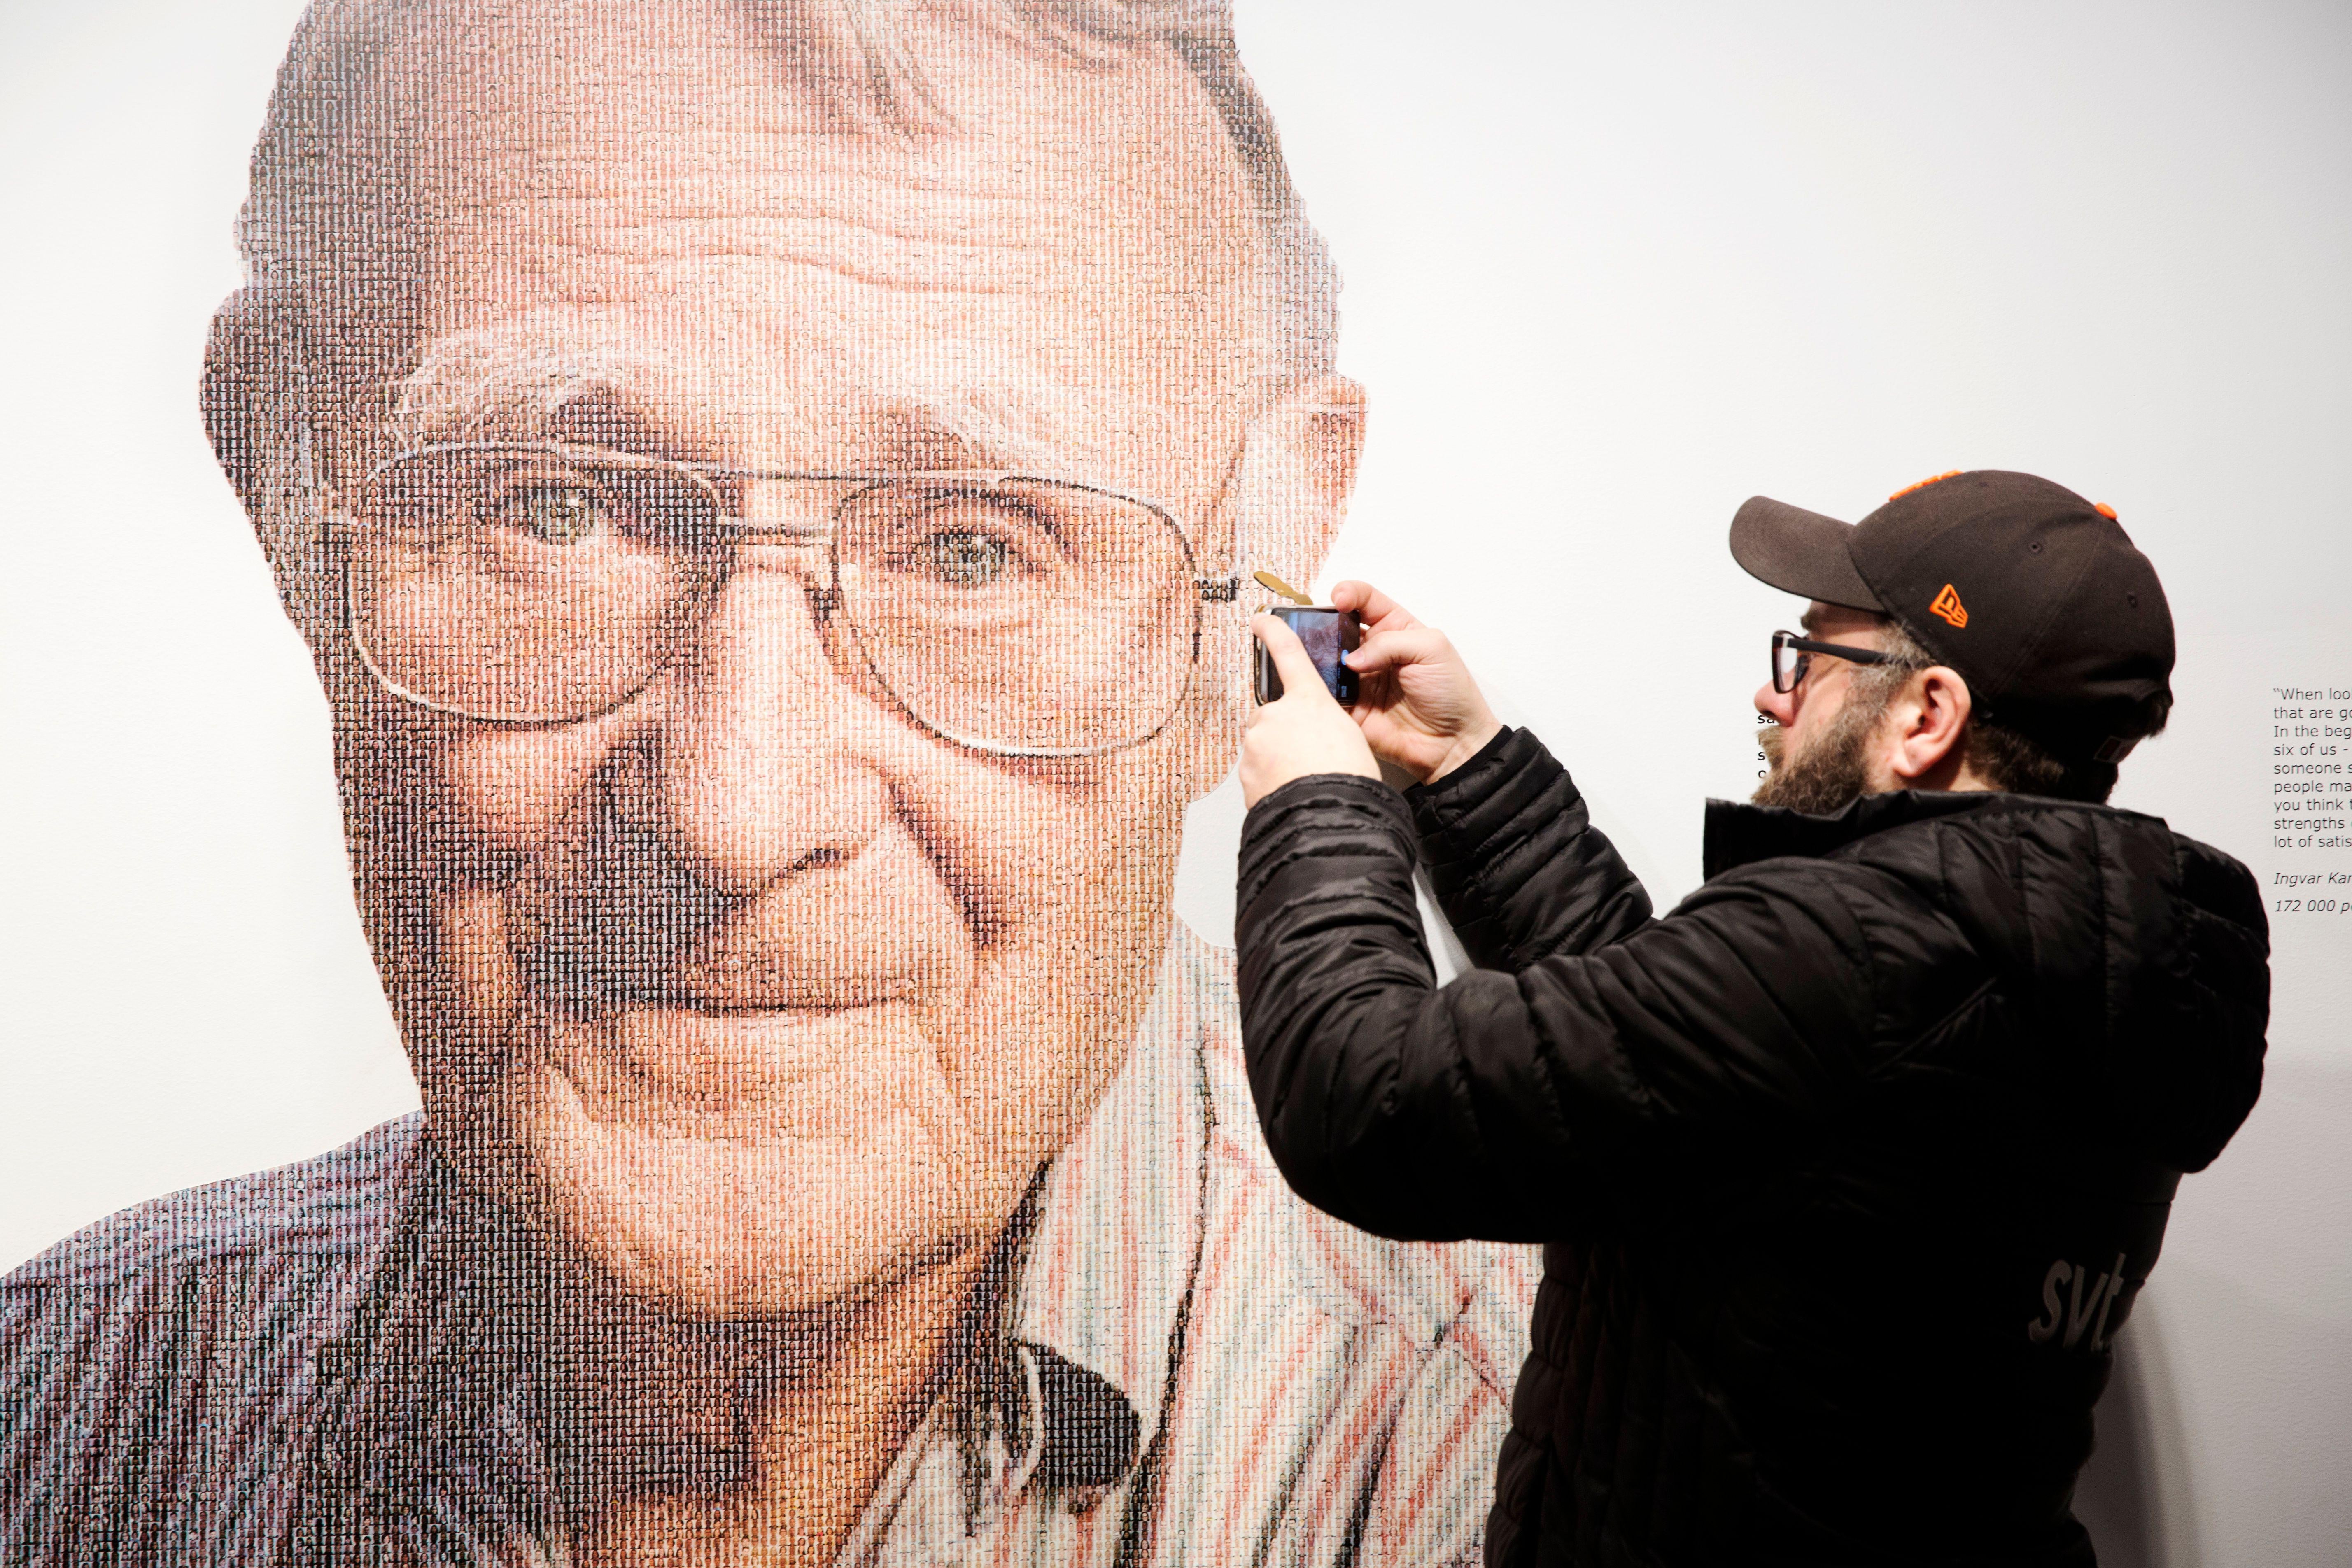 A visitor takes a mobile photo of a picture of Ingvar Kamprad, founder of Swedish multinational furniture retailer IKEA, at the IKEA museum in Almhult, Sweden, on January 28, 2018. Ingvar Kamprad, the enigmatic founder of Swedish furniture giant IKEA, died aged 91 on Sunday, the company said.